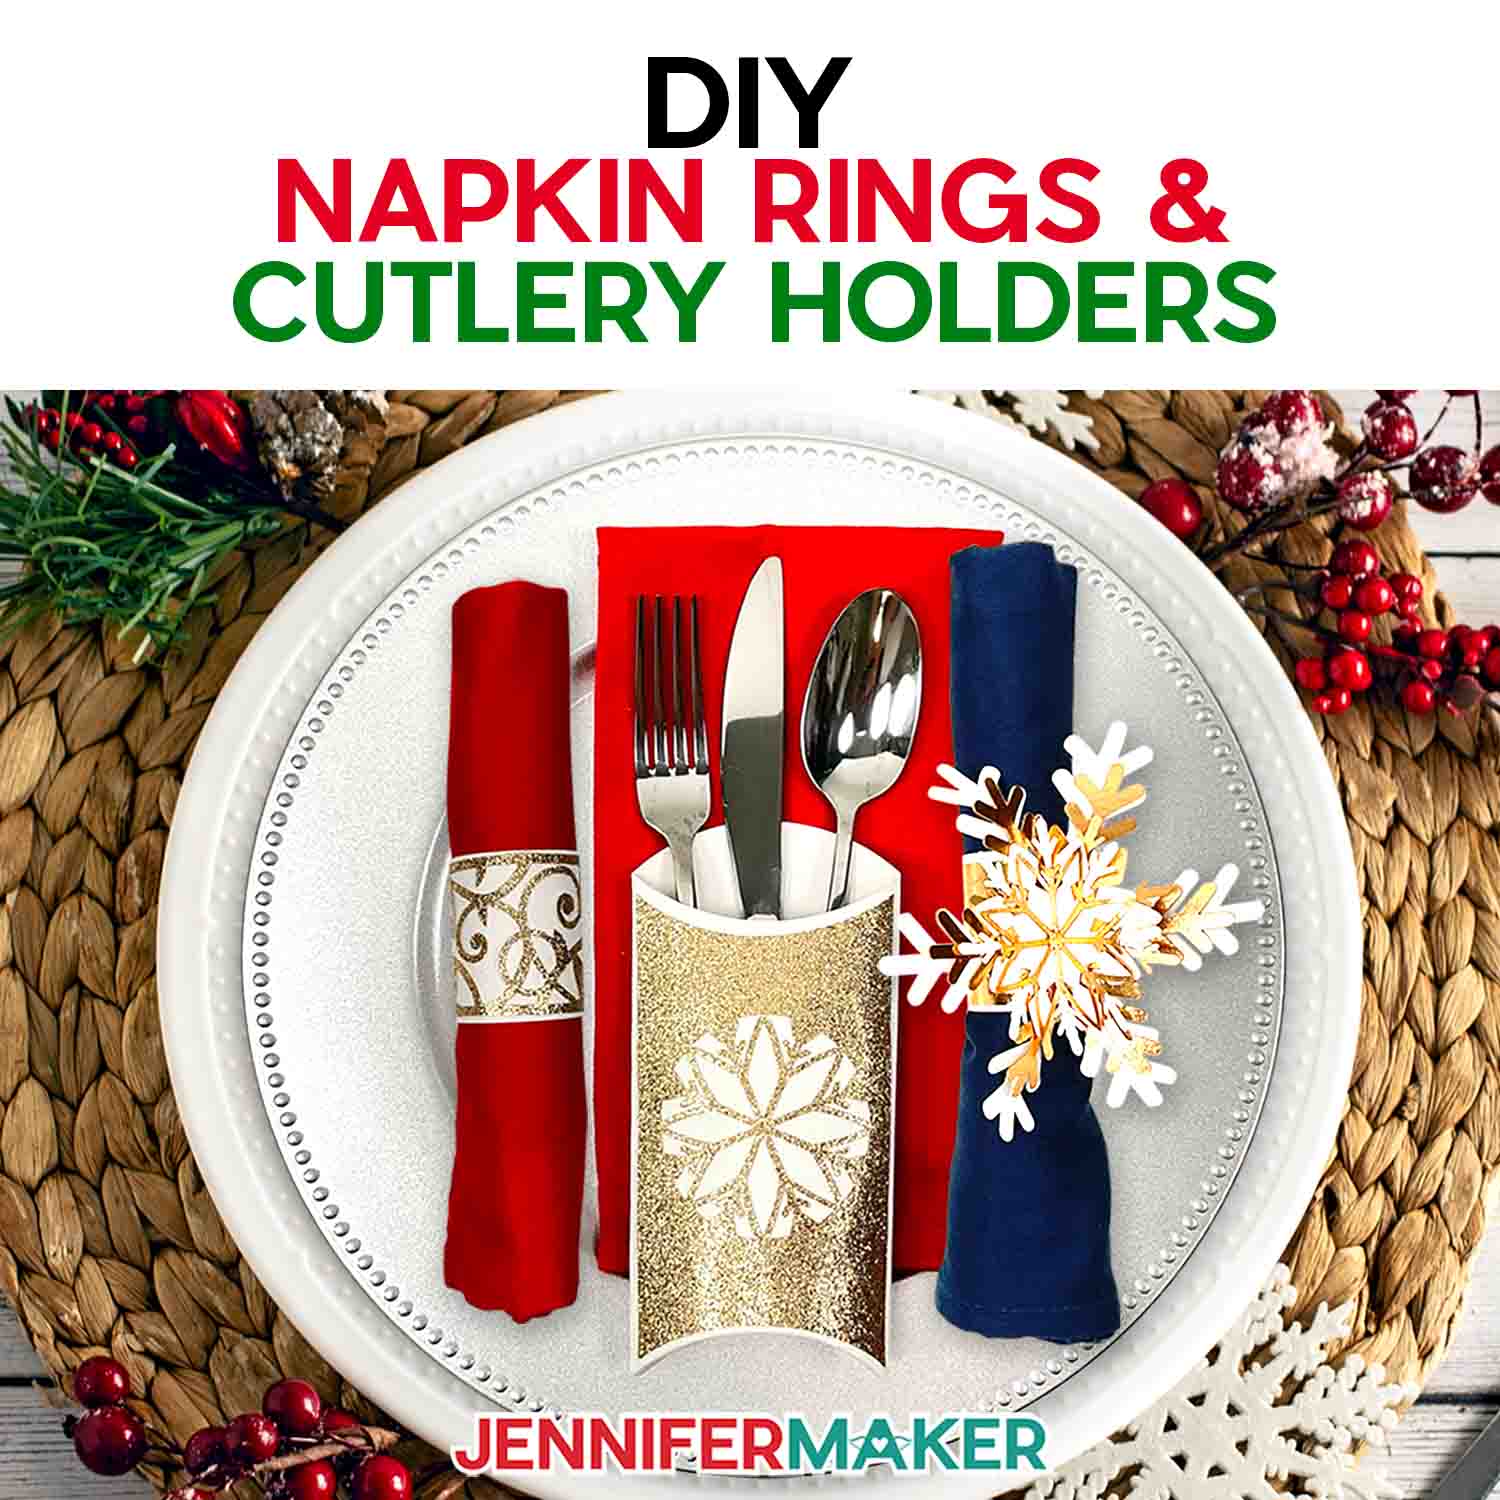 Make Easy DIY Napkin Rings And Cutlery Holders For Holidays!